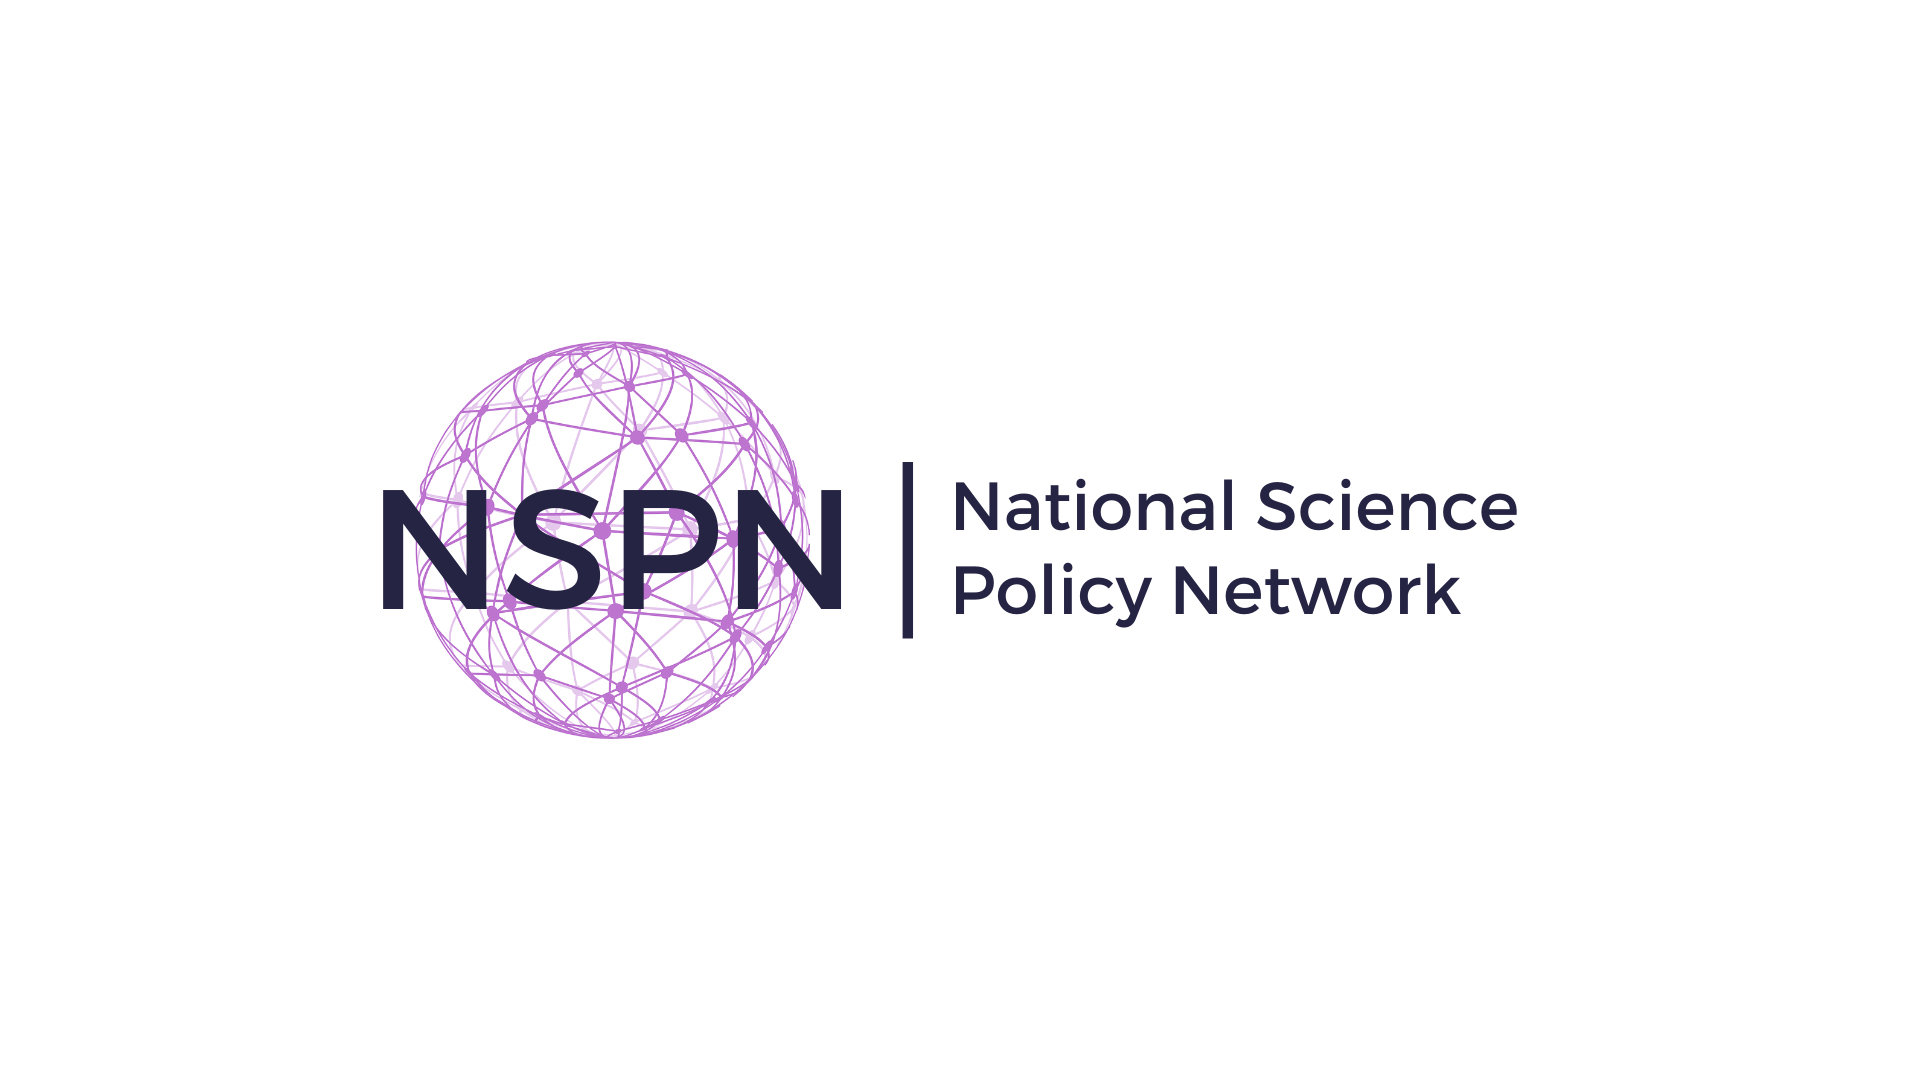 Graphic of National Science Policy Network logo